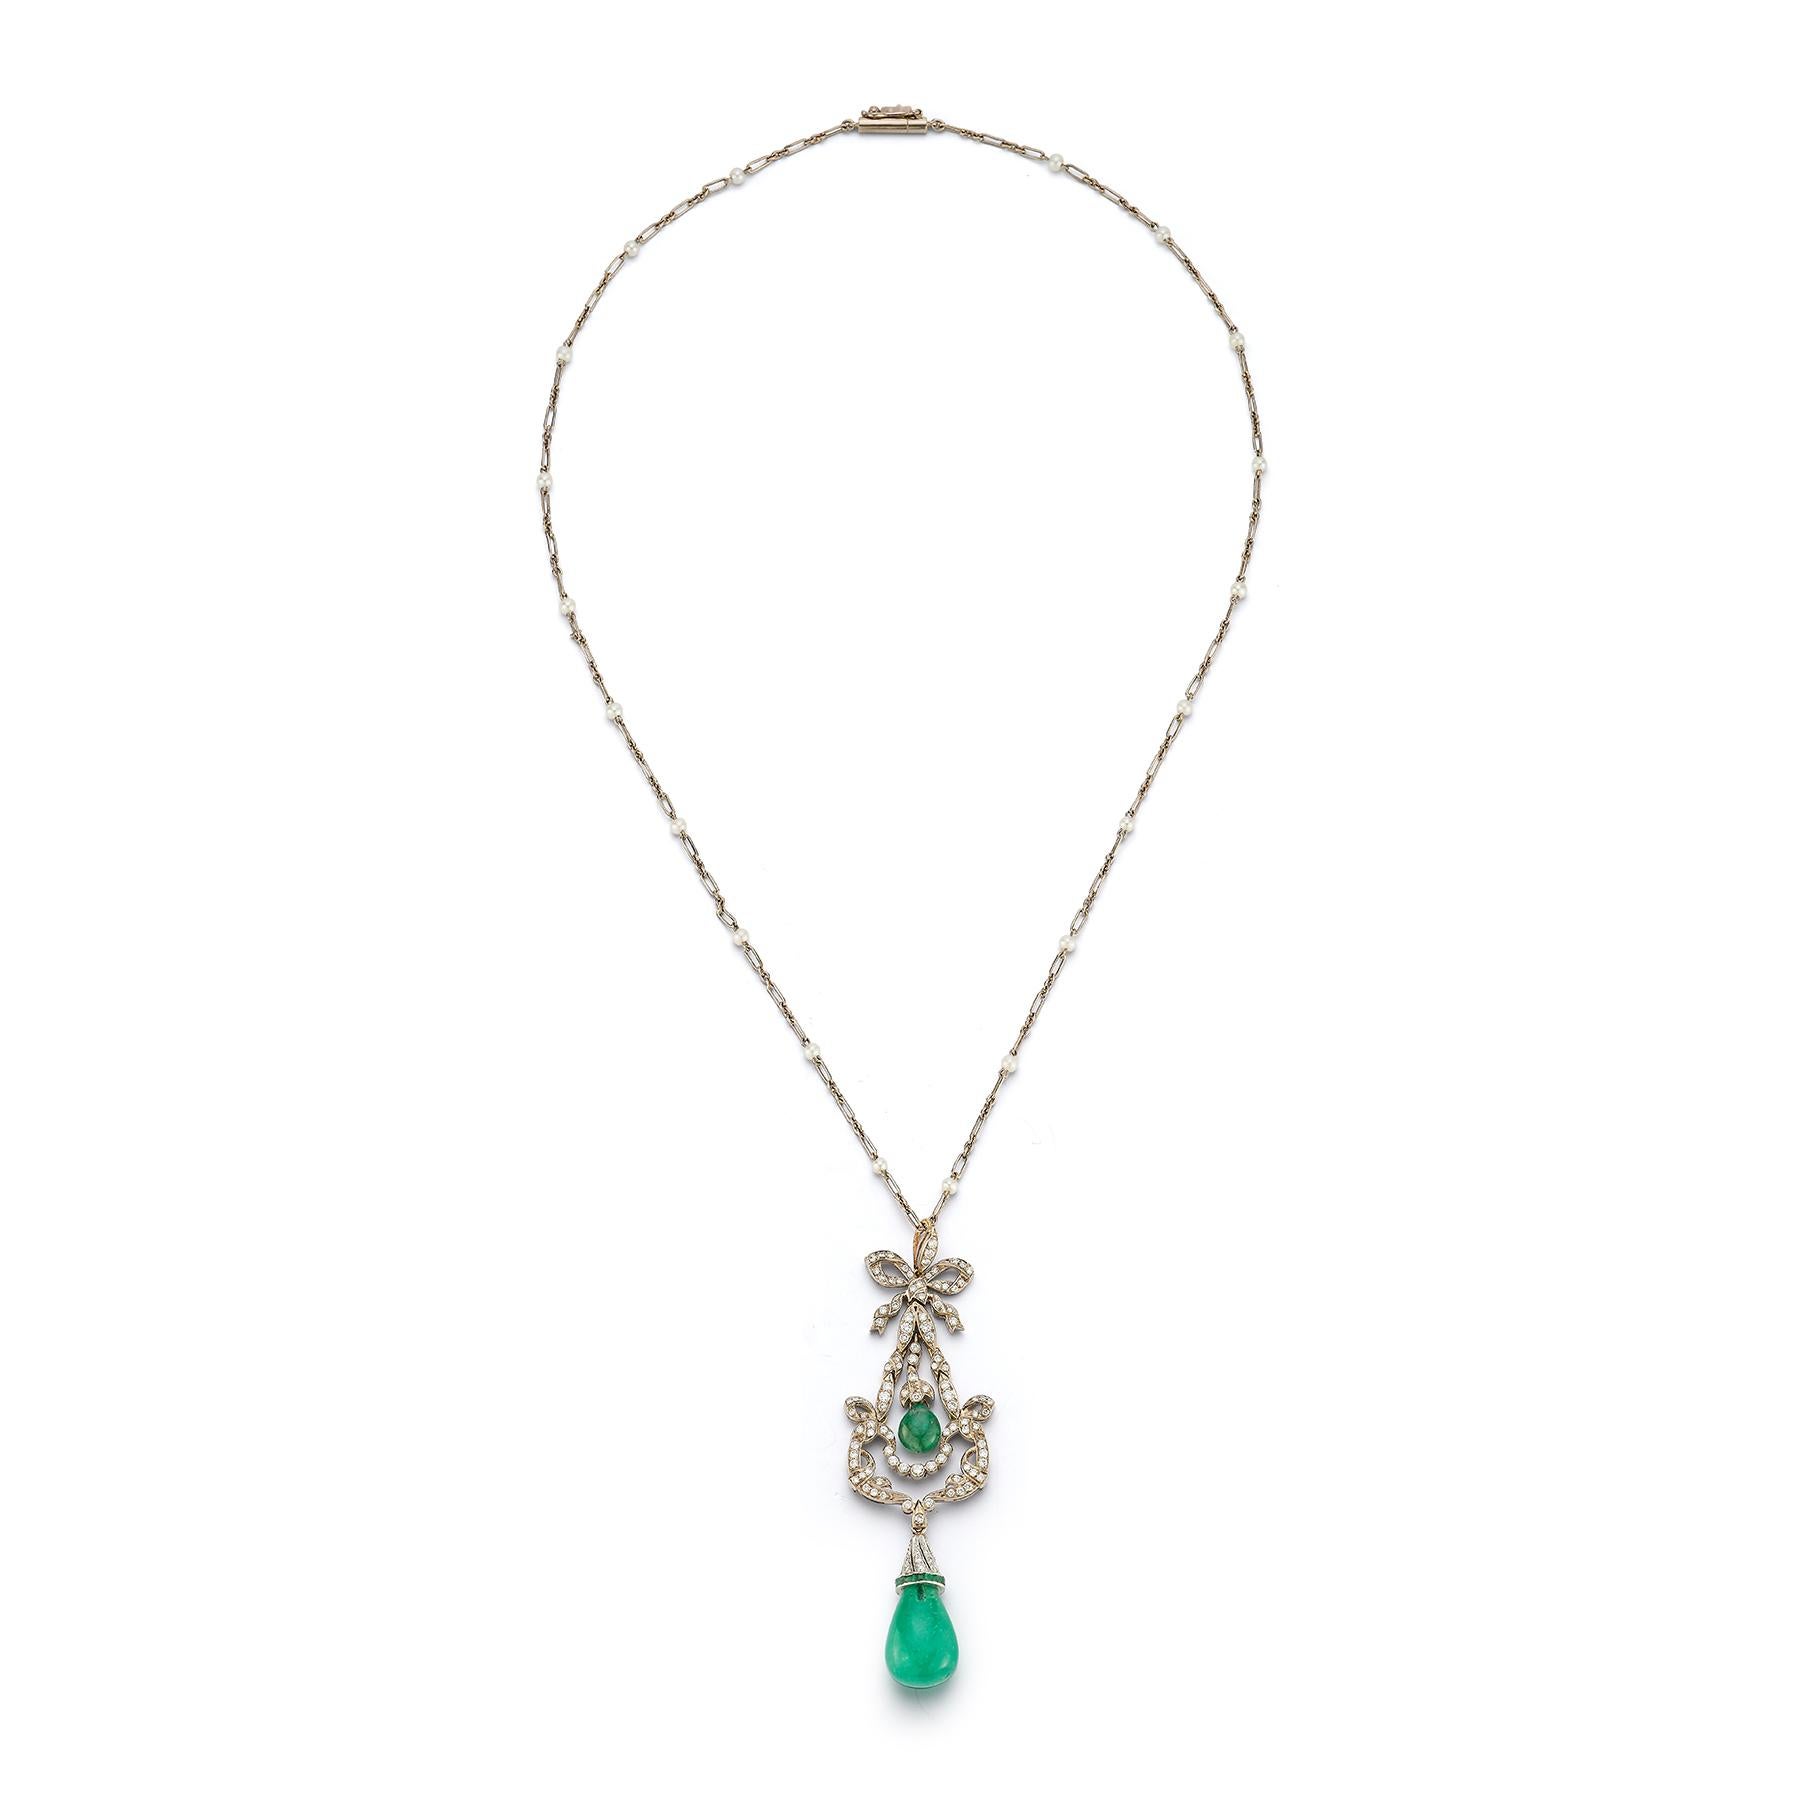 Emerald Drop Pendant Necklace In Excellent Condition For Sale In New York, NY